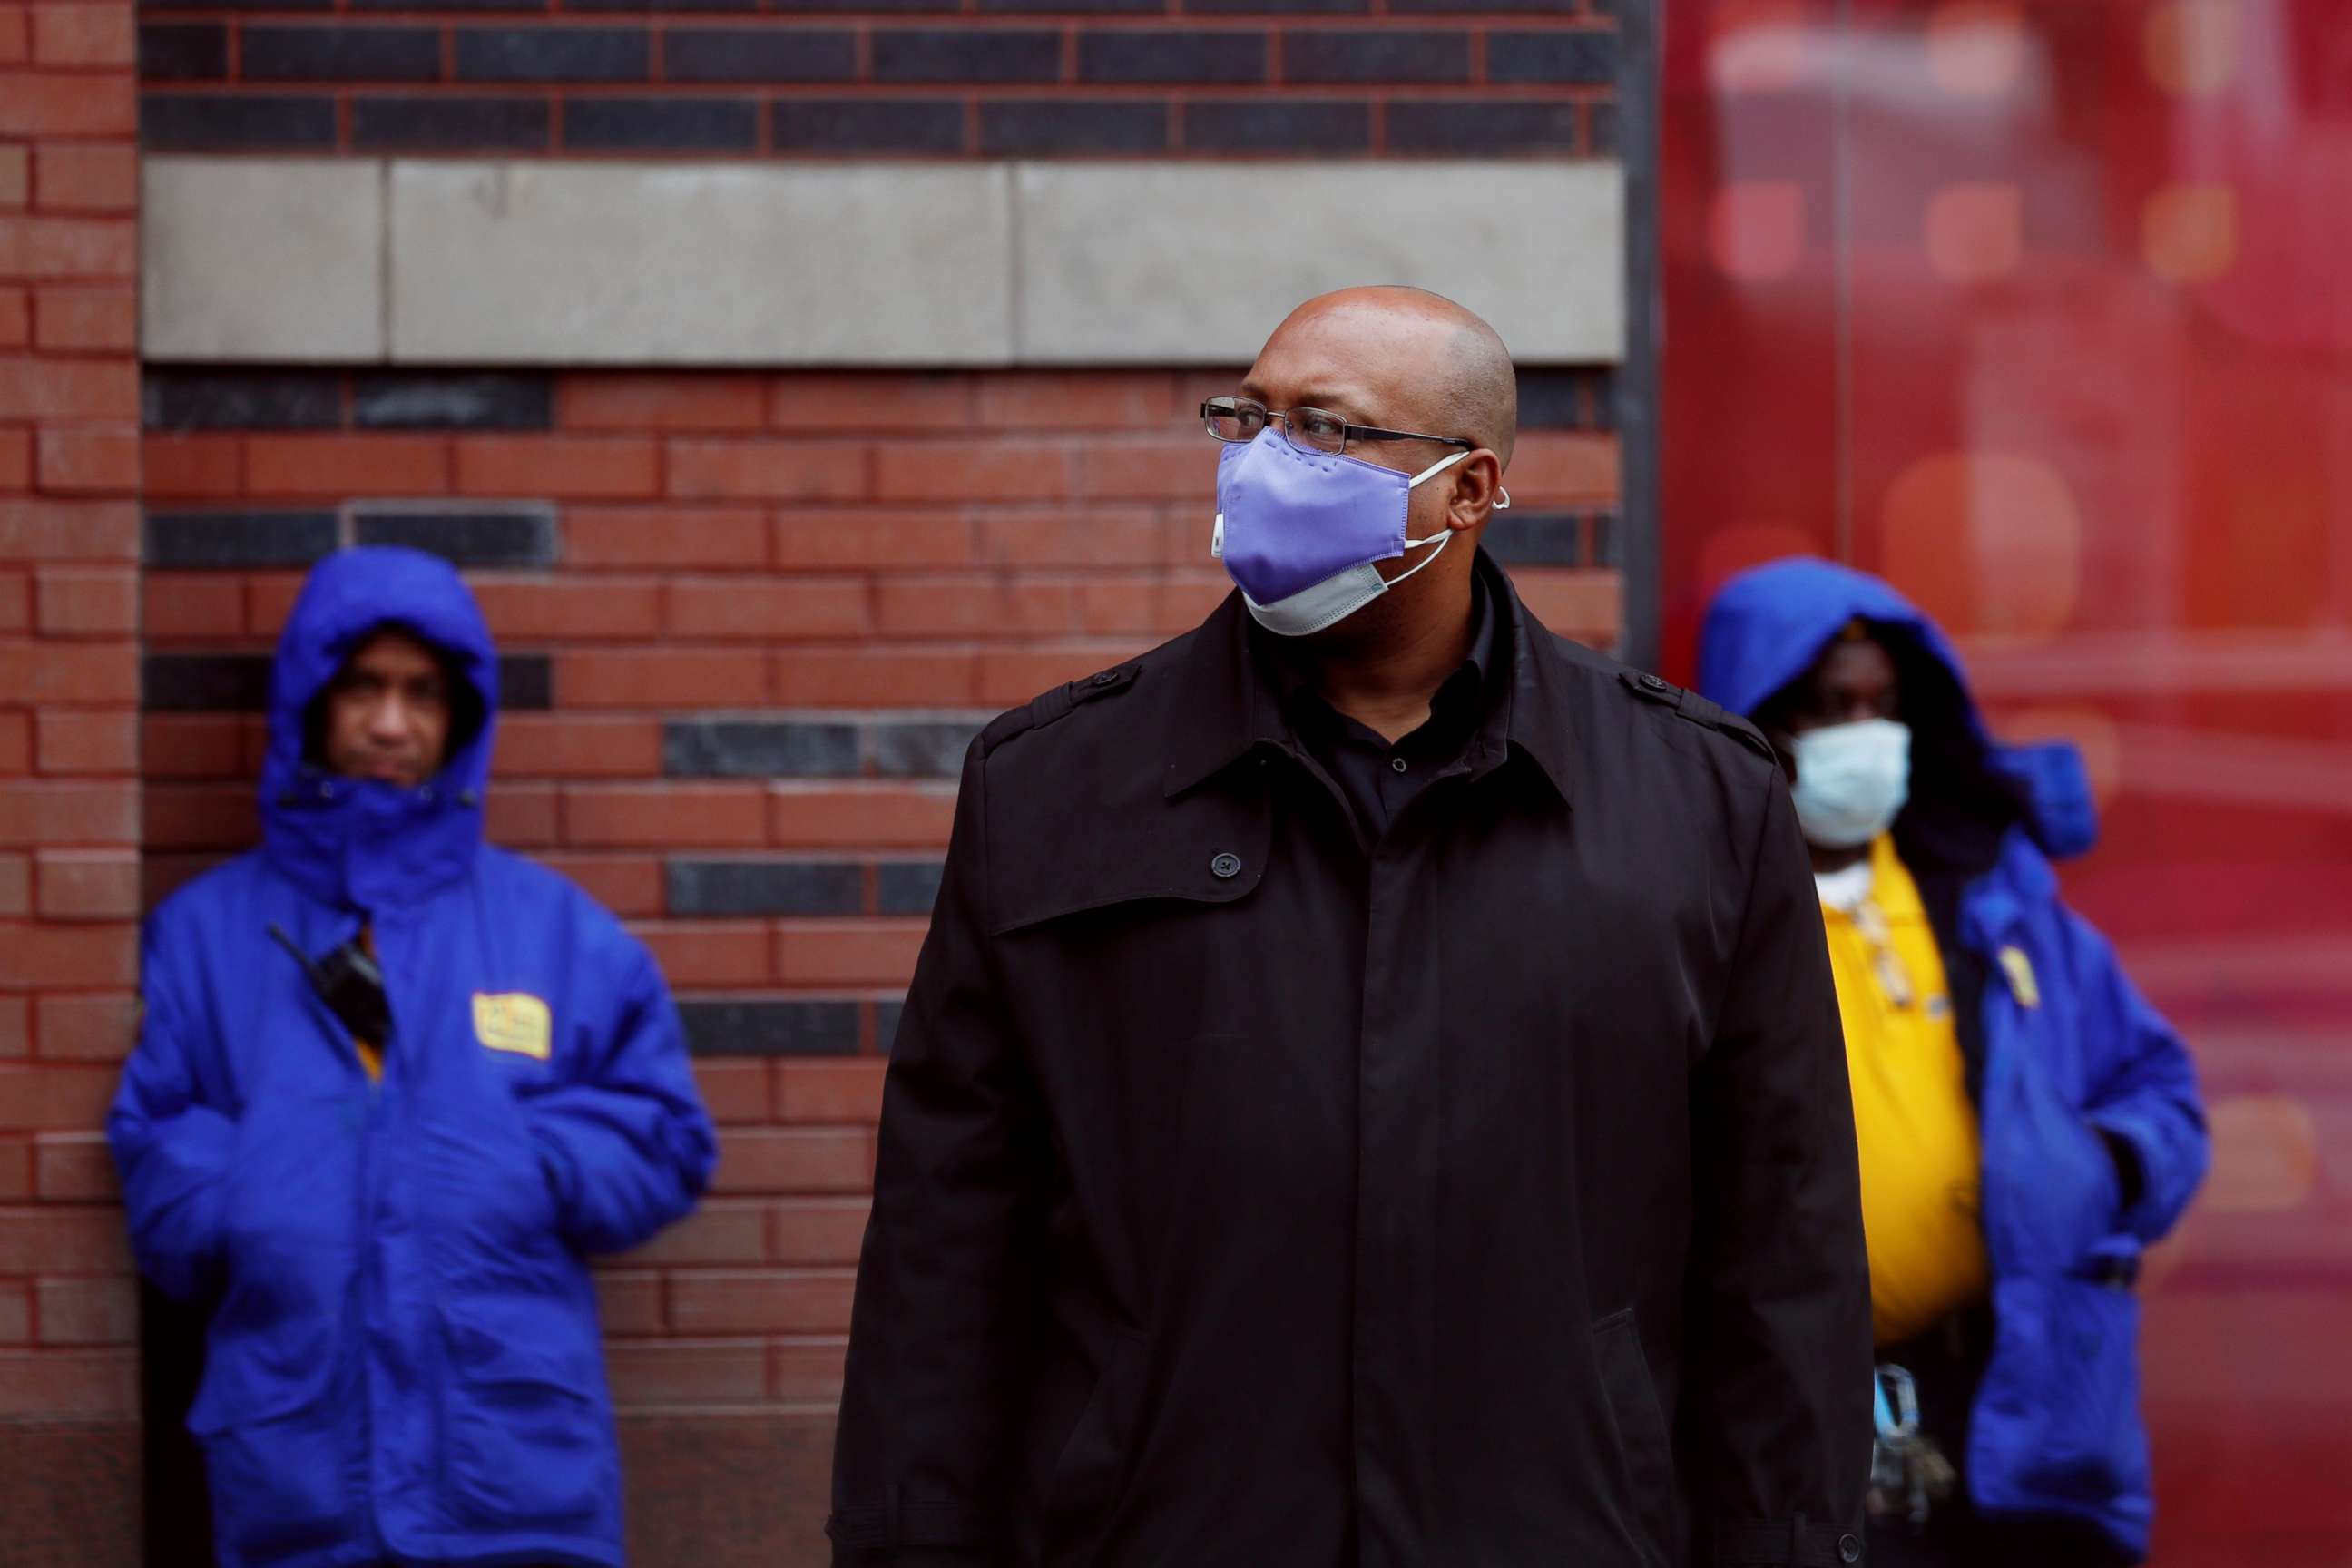 PHOTO: Commuters wear masks while waiting for a bus as the outbreak of coronavirus continues in the Manhattan borough of New York City, on May 8, 2020.